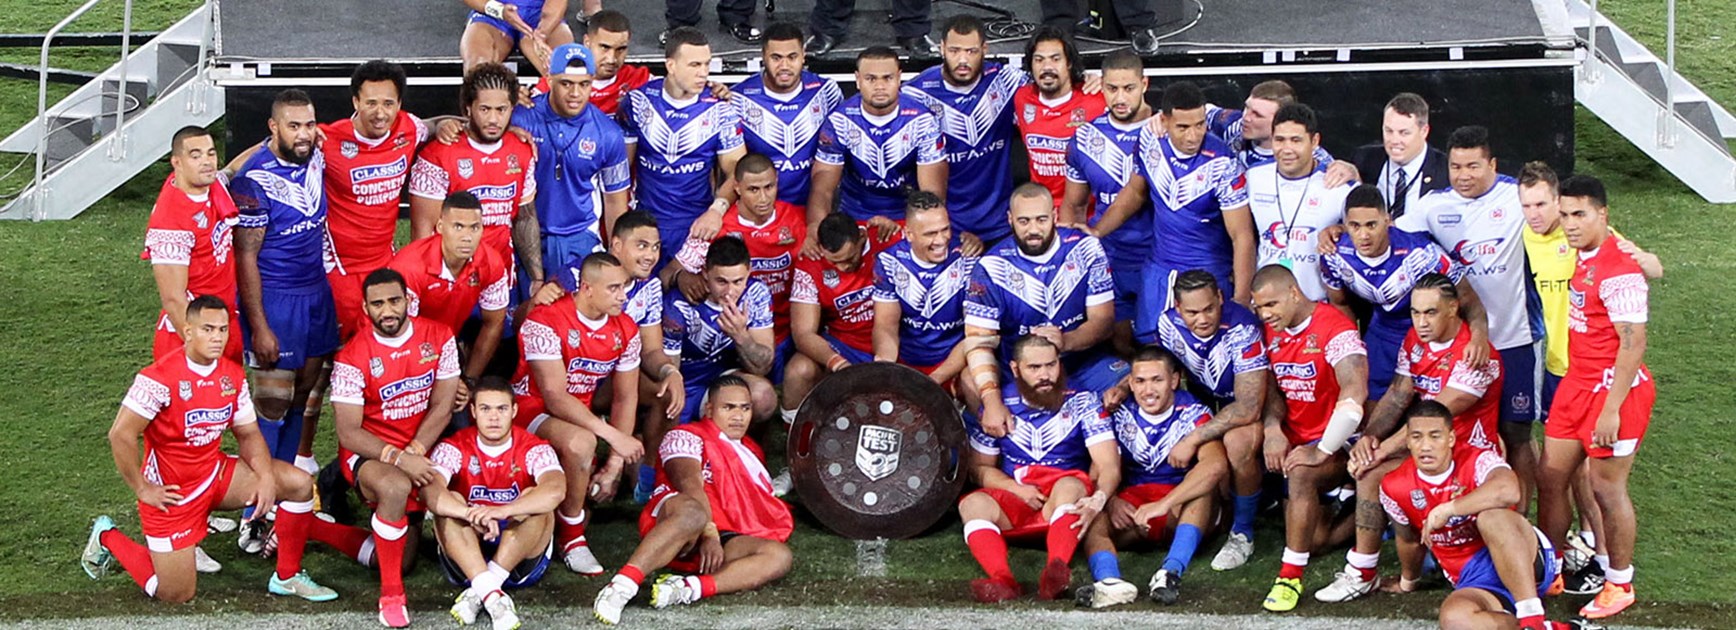 Samoa and Tonga players put on a great performance in their Pacific Test at Cbus Super Stadium.